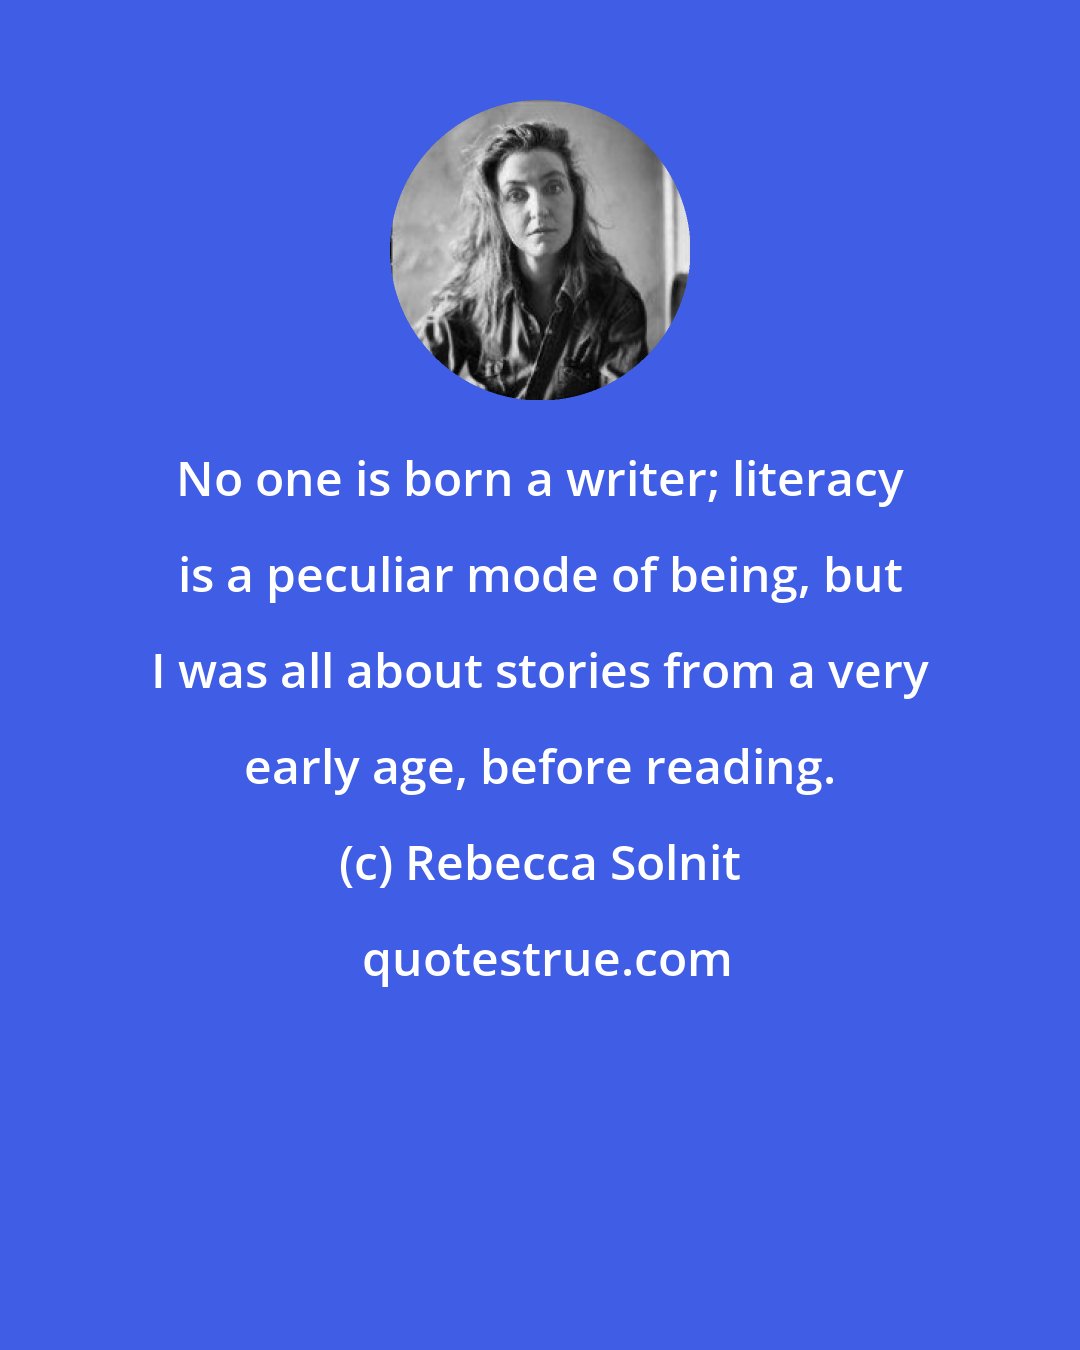 Rebecca Solnit: No one is born a writer; literacy is a peculiar mode of being, but I was all about stories from a very early age, before reading.